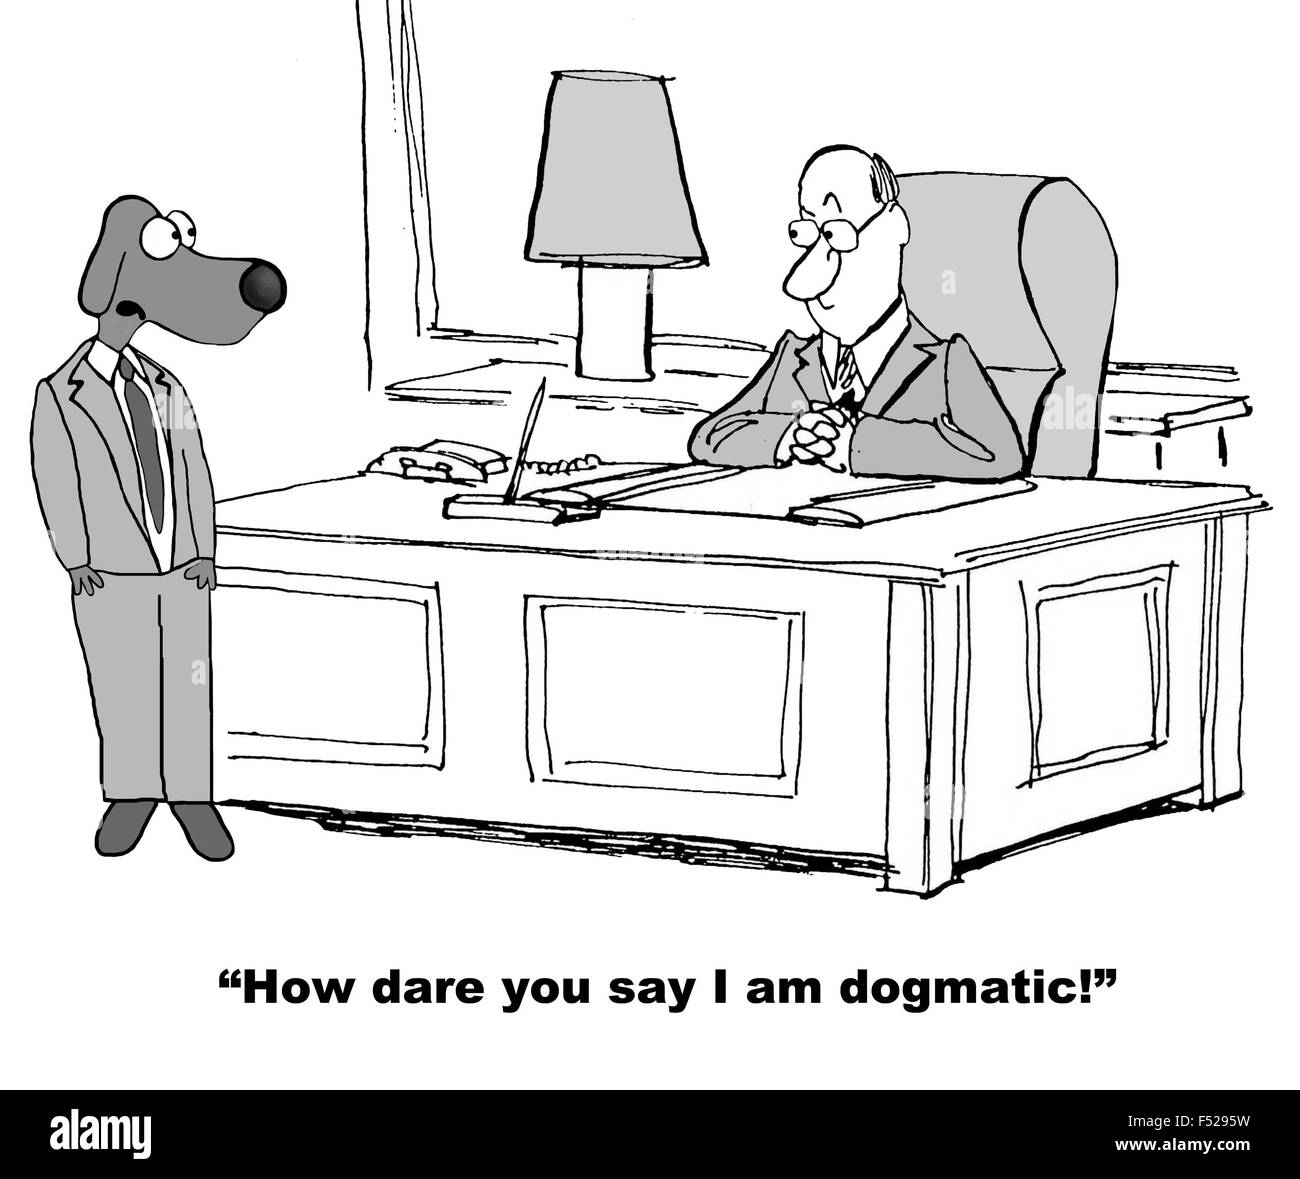 Business cartoon of business dog saying to coworker, 'How dare you say I am dogmatic!'. Stock Photo